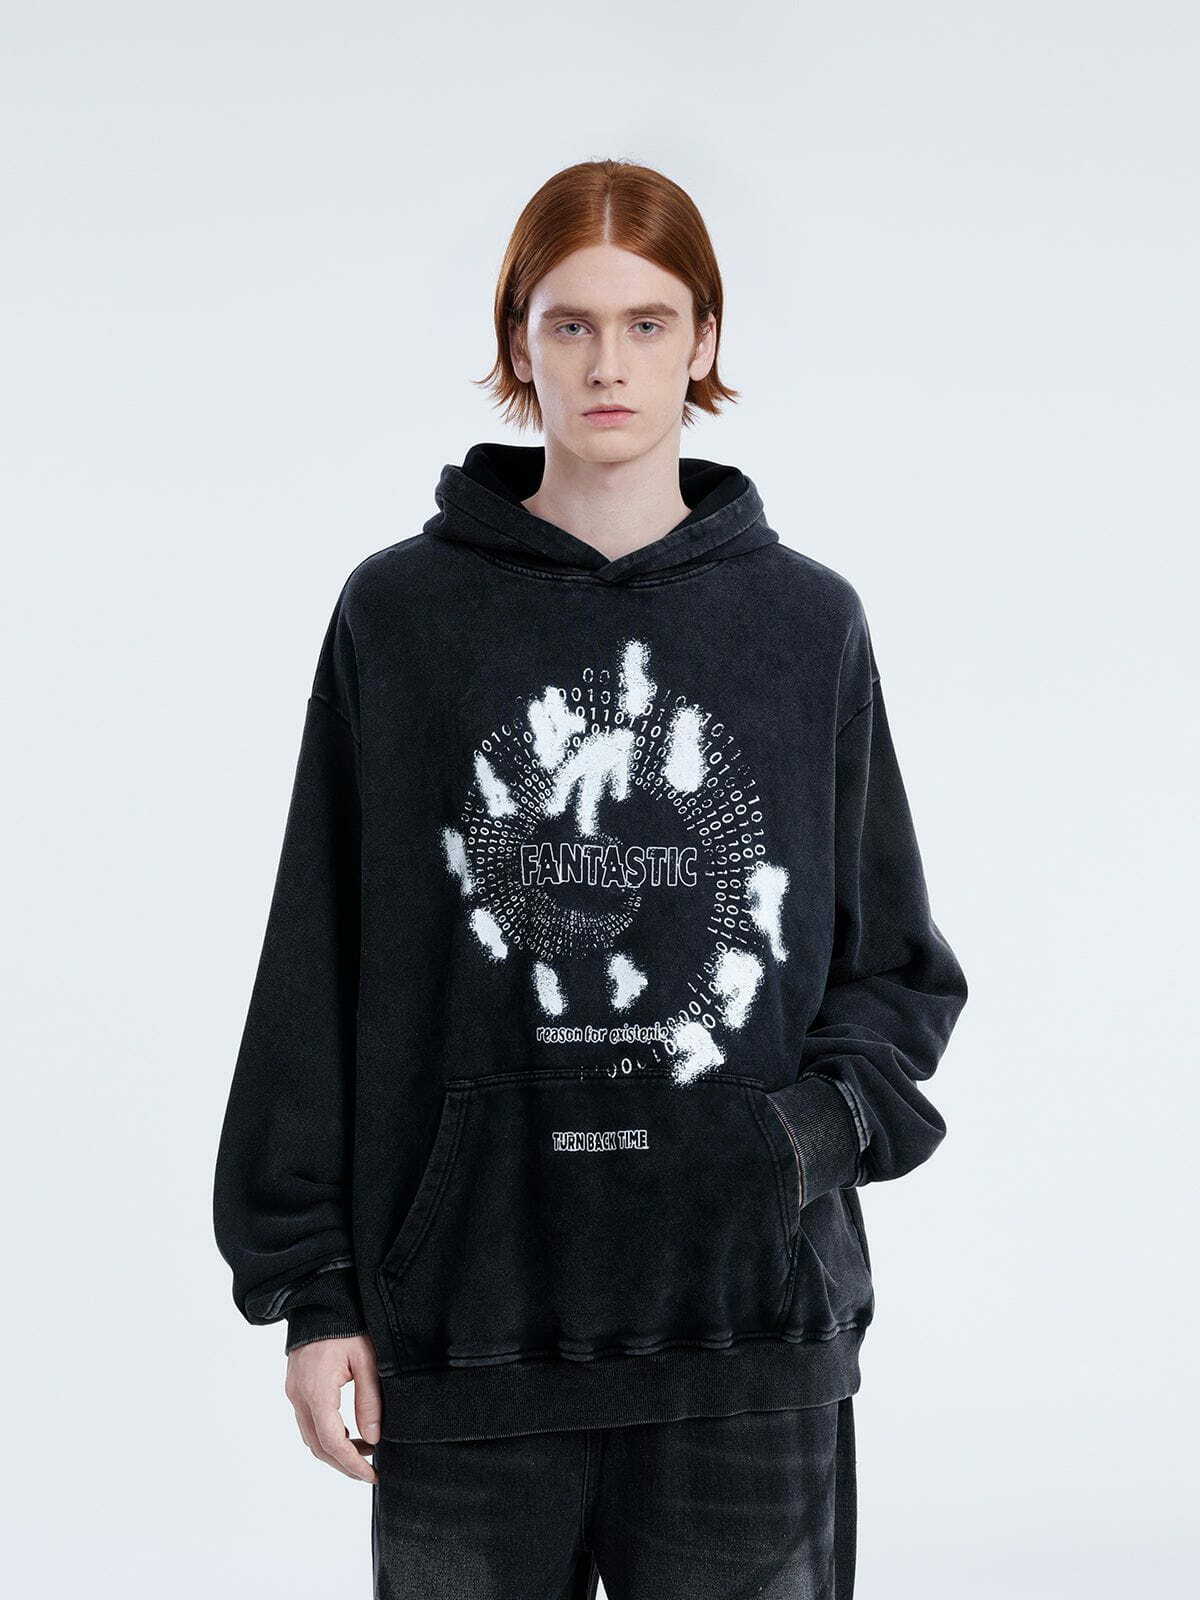 abstract shadow hoodie washed print   youthful urban style 7784